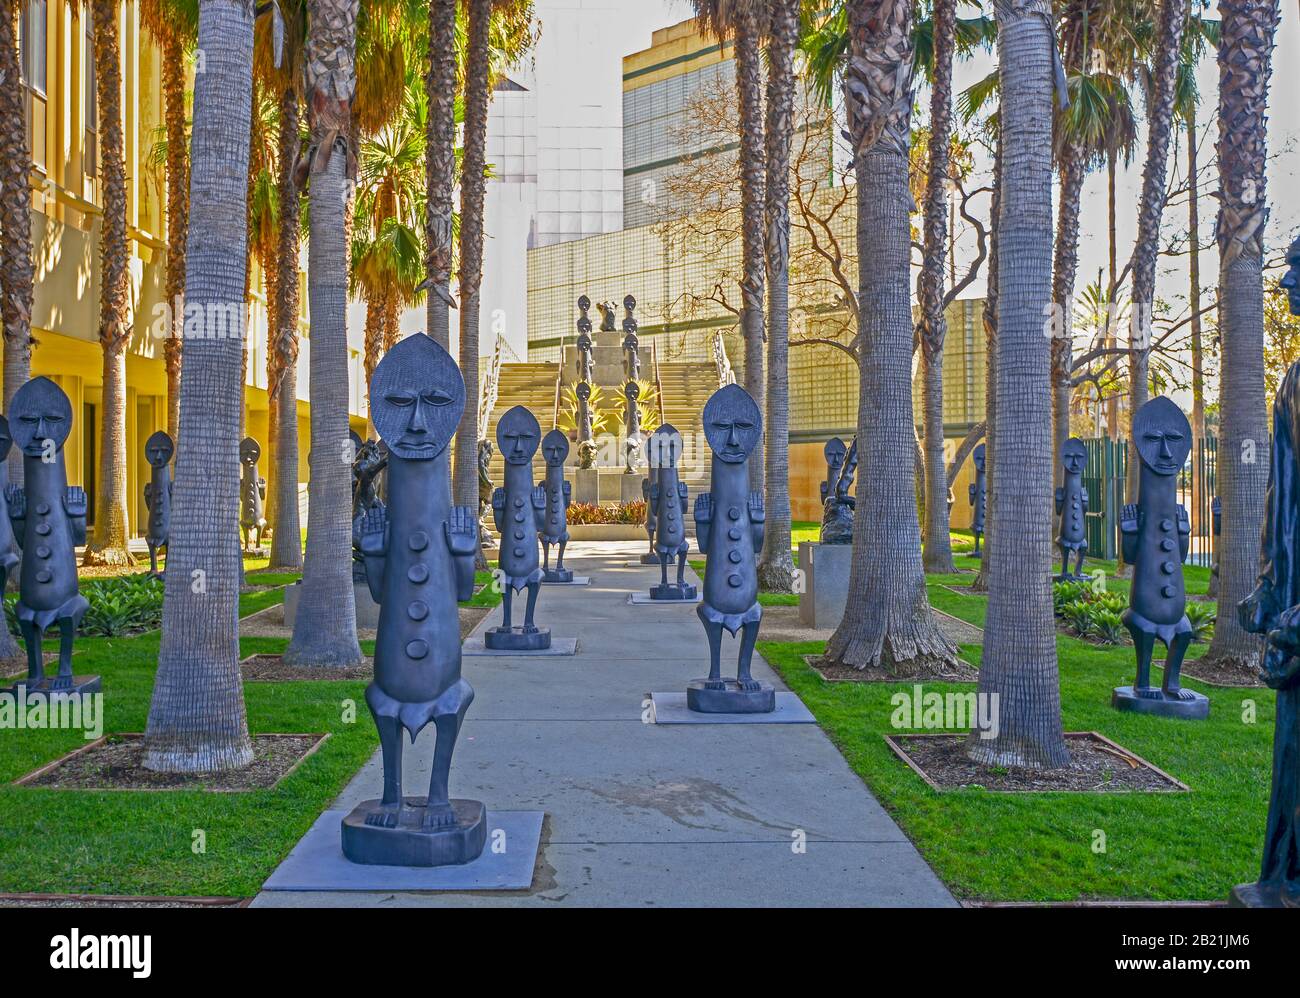 LACMA The Invisible man and the Masque of Blackness, B. Gerald Cantor Sculpture Garden im Los Angeles County Museum of Art, Los Angeles, Stockfoto